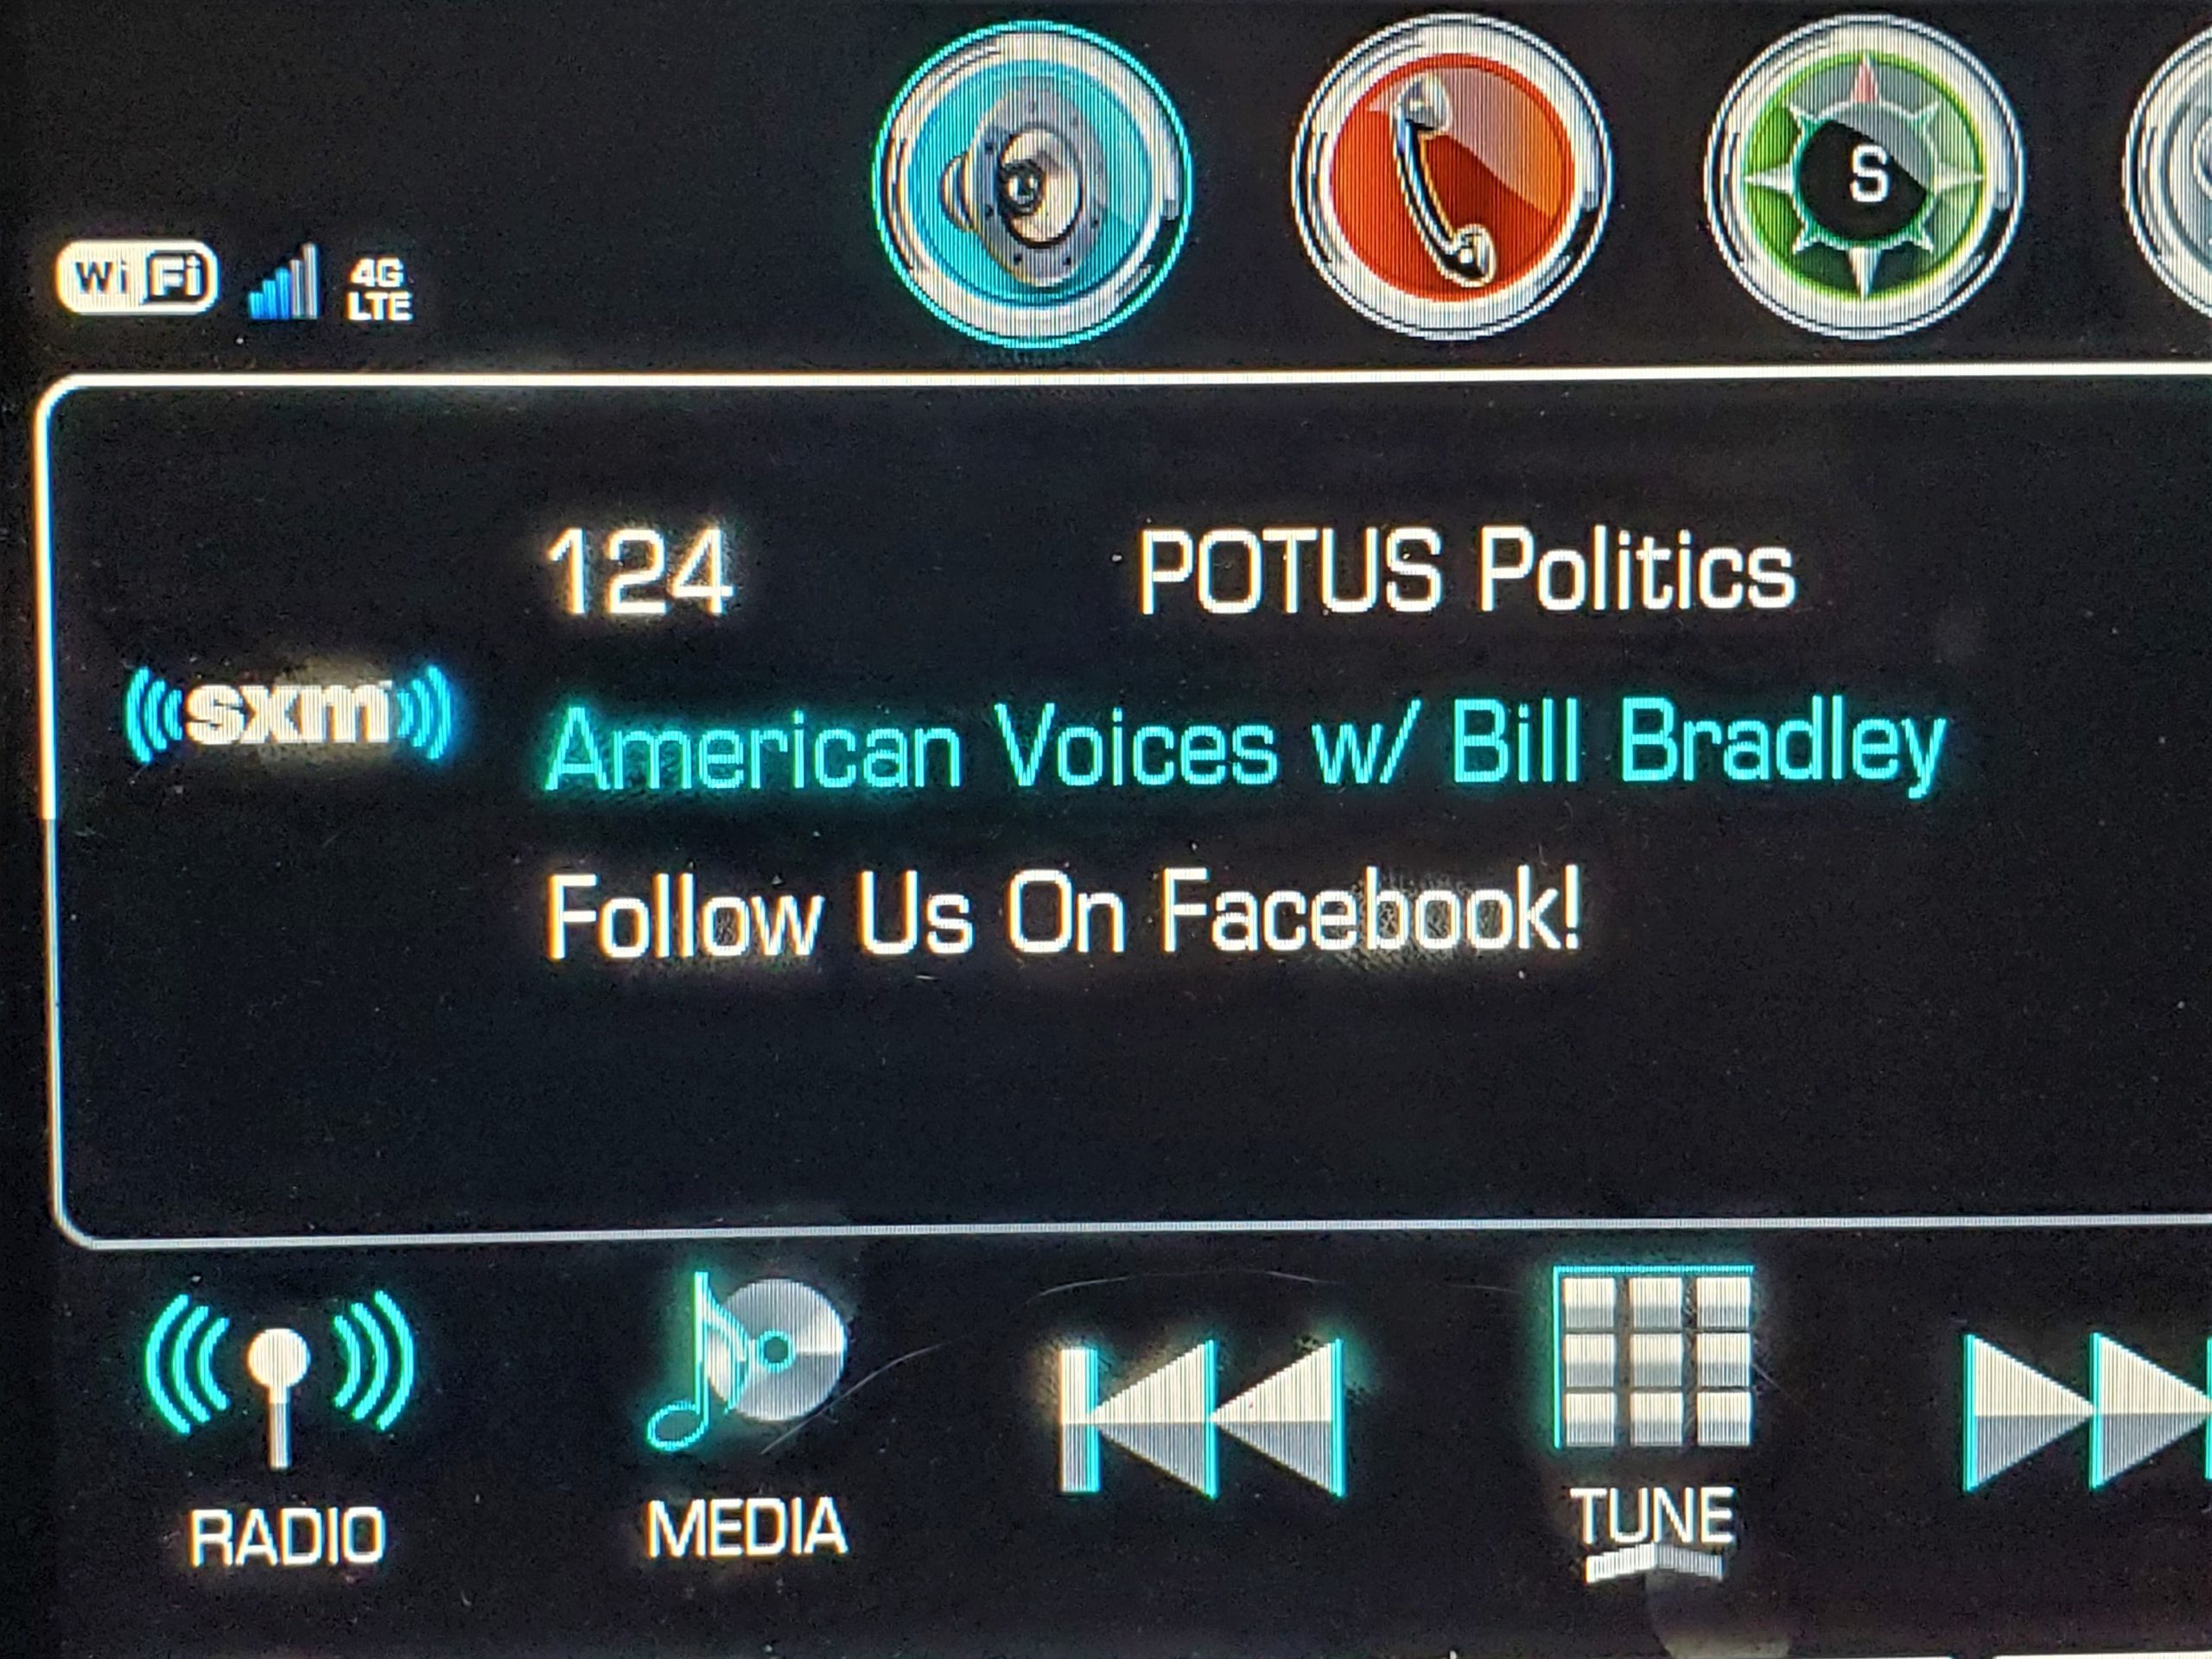 A beautifully-produced podcast hosted by Bill Bradley on Sirius XM and featuring NB